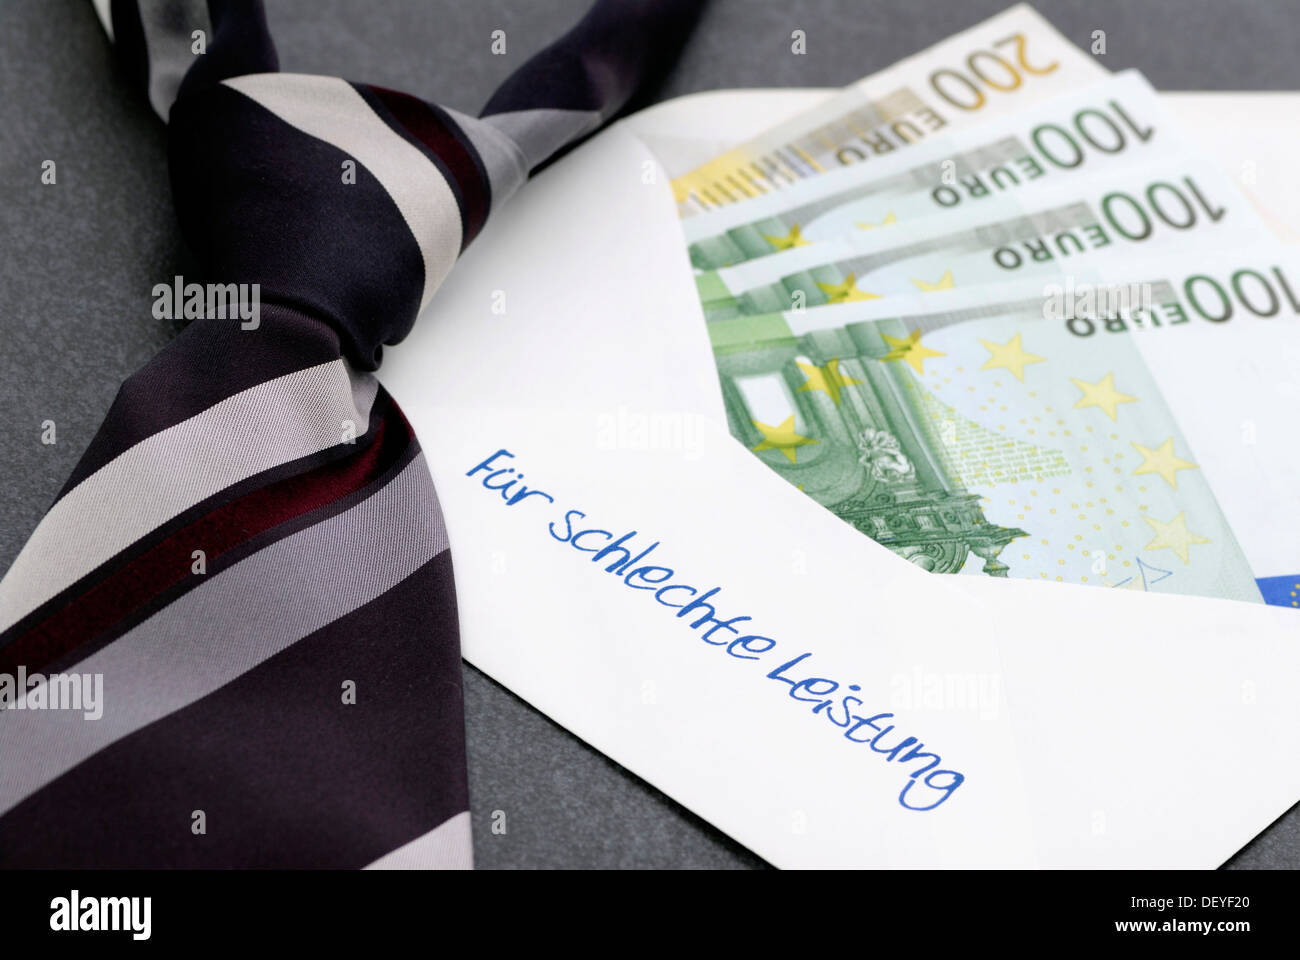 Envelope with writing 'Fuer schlechte Leistung', 'For poor performance' and bank notes, symbolic image for banker bonus Stock Photo